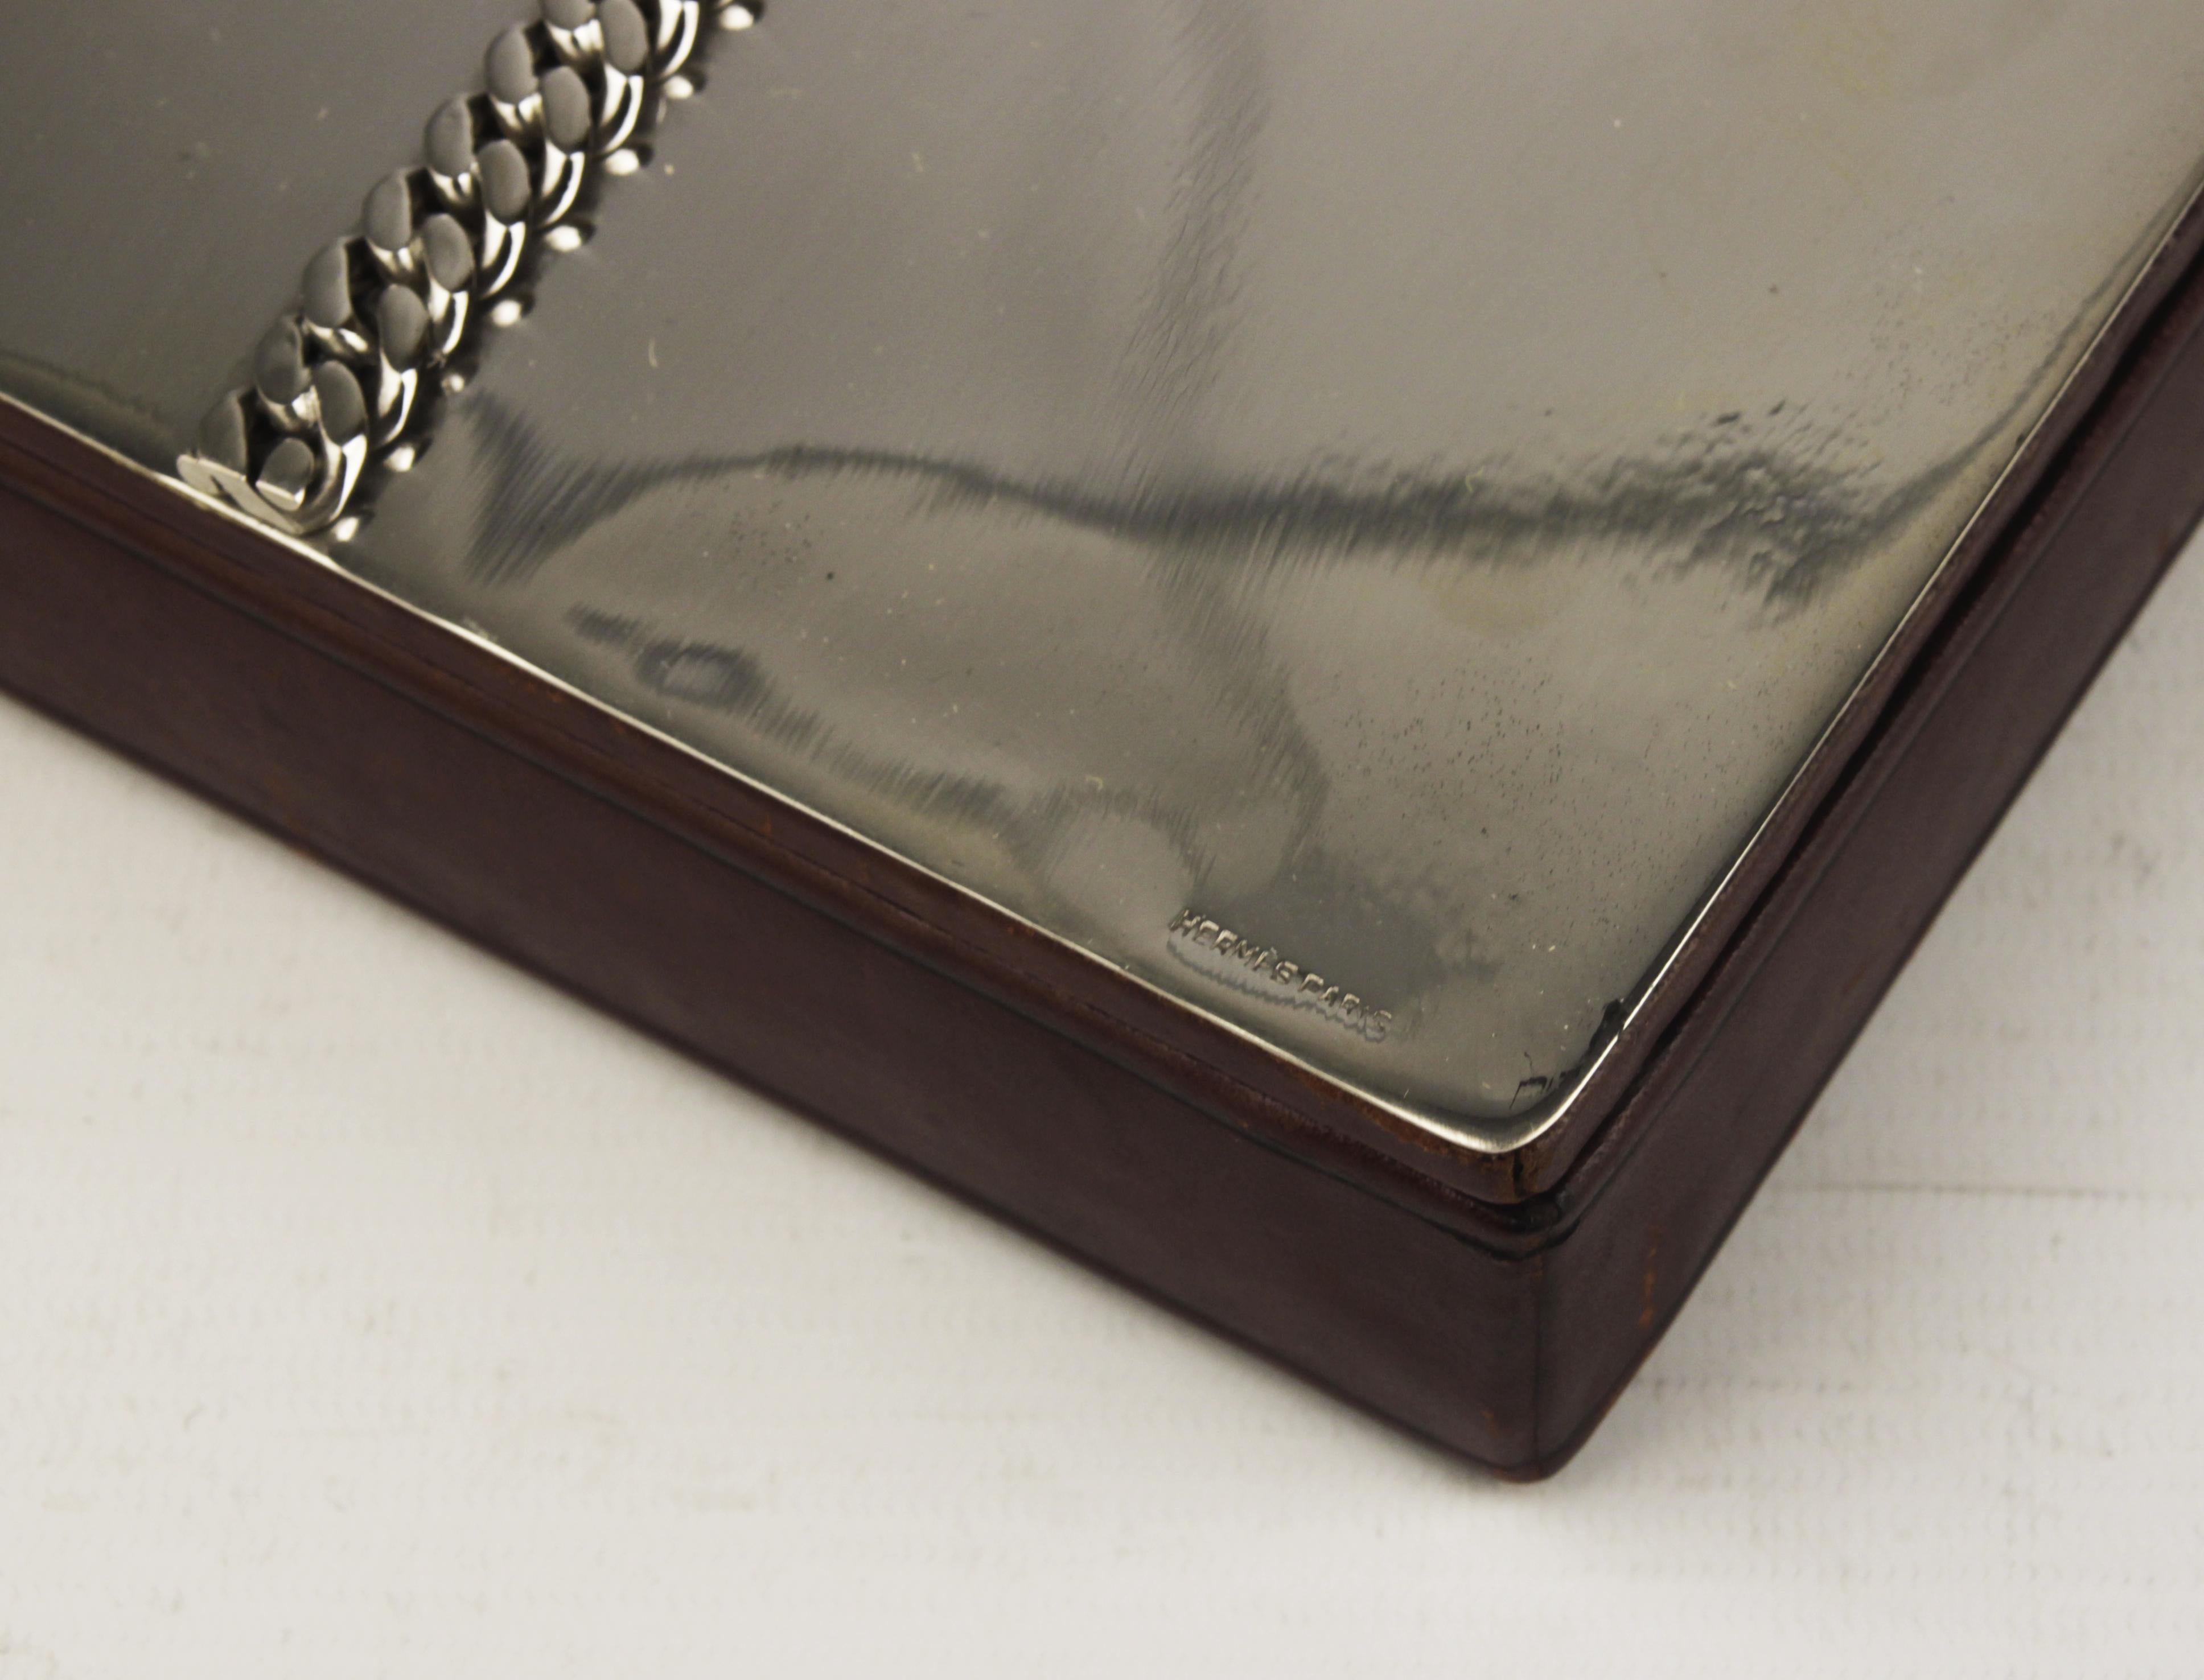 Mid-20th Century Wooden Box with Silver Buckle Lid by French Brand Hermès Paris 1